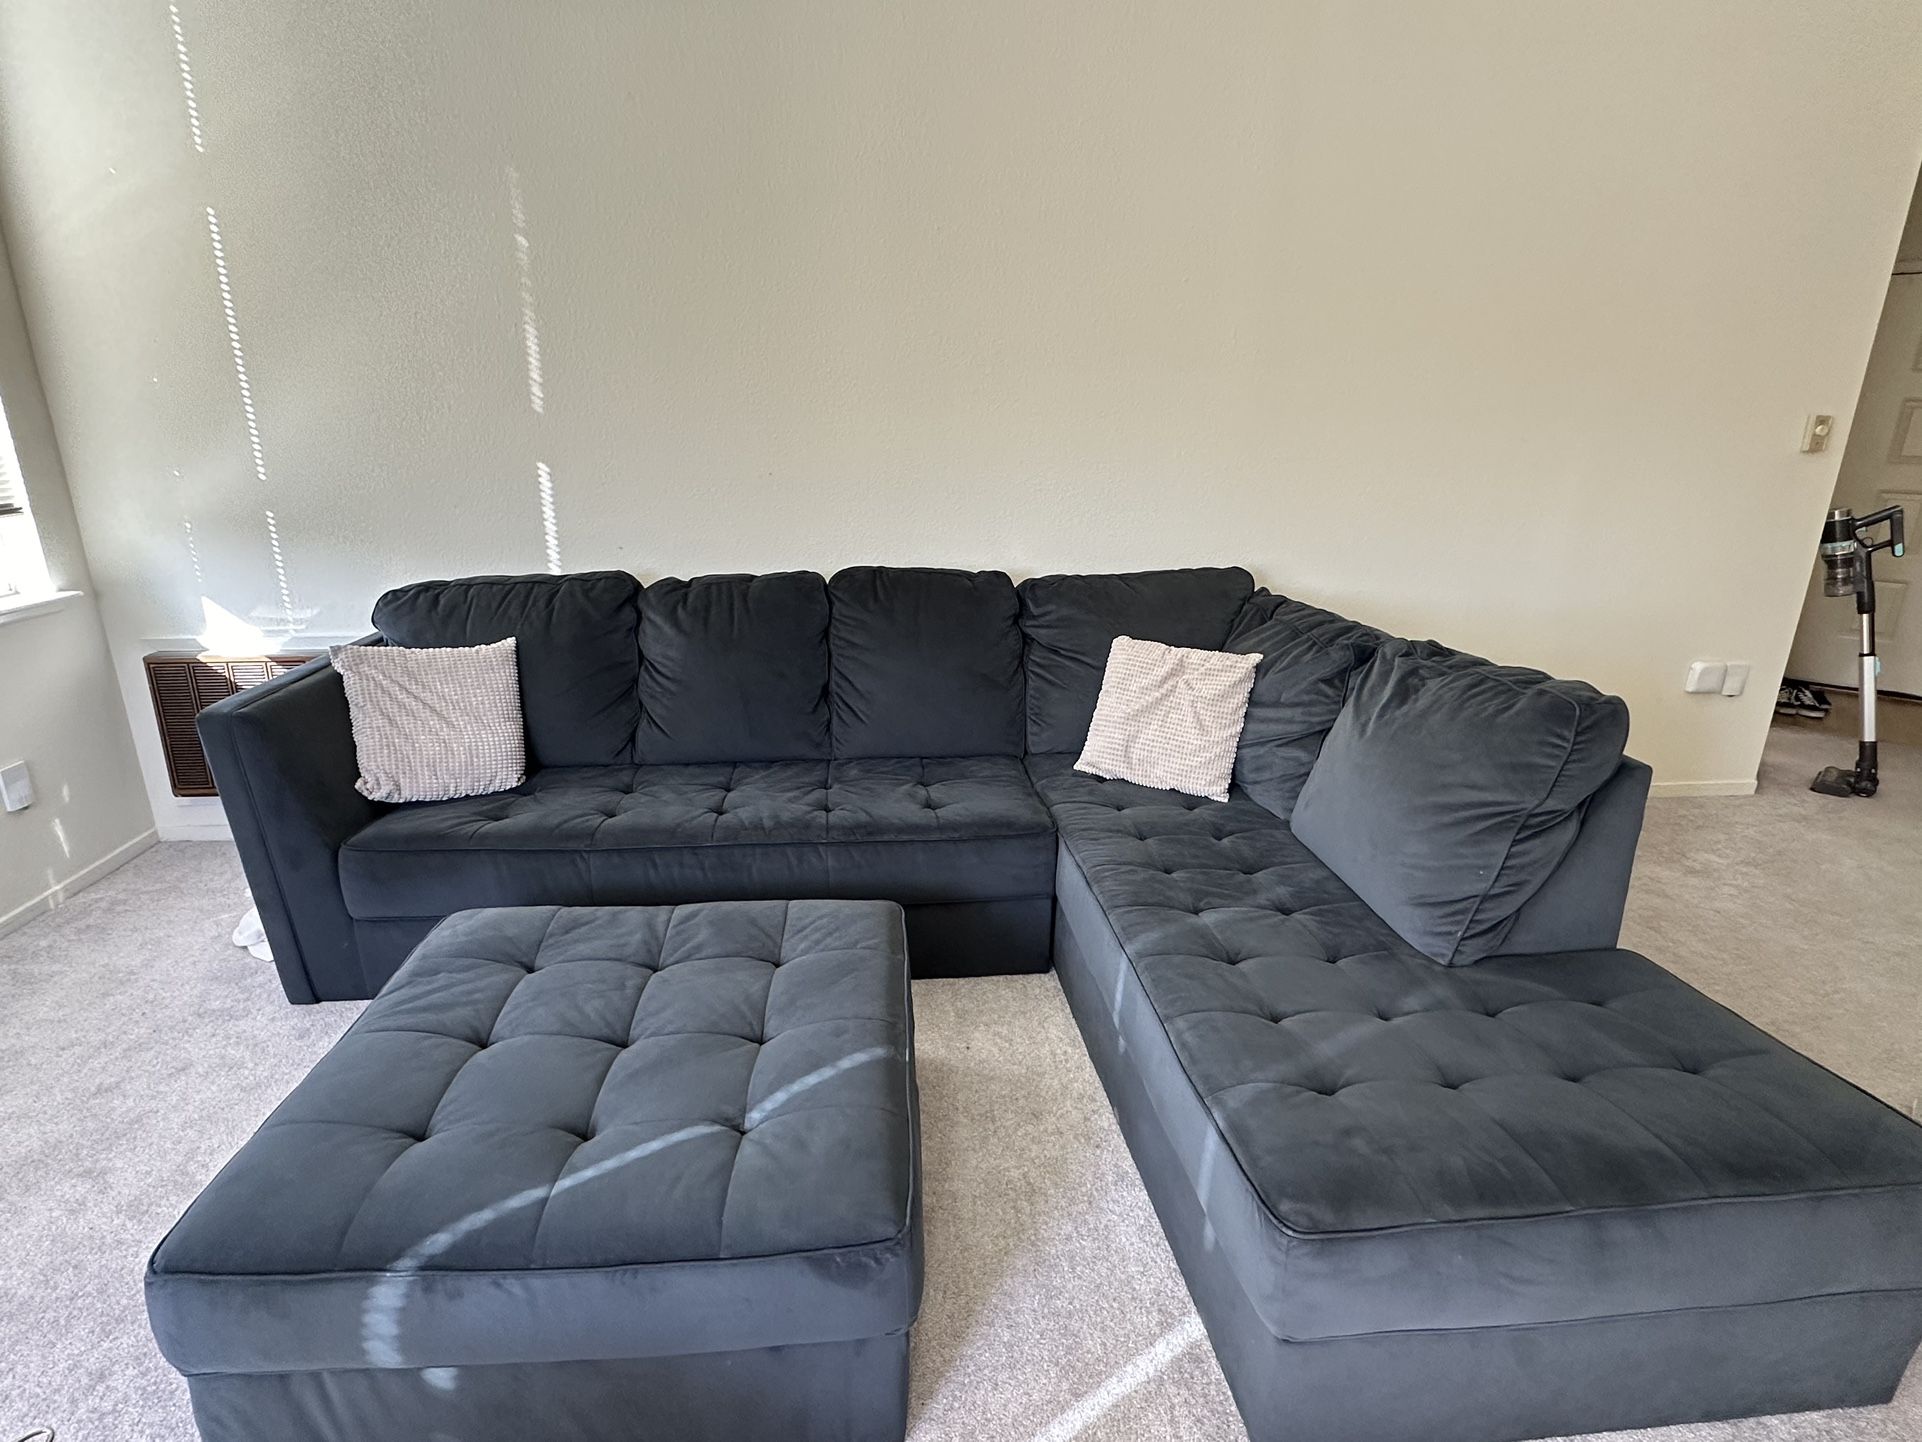 Couches For Living Room